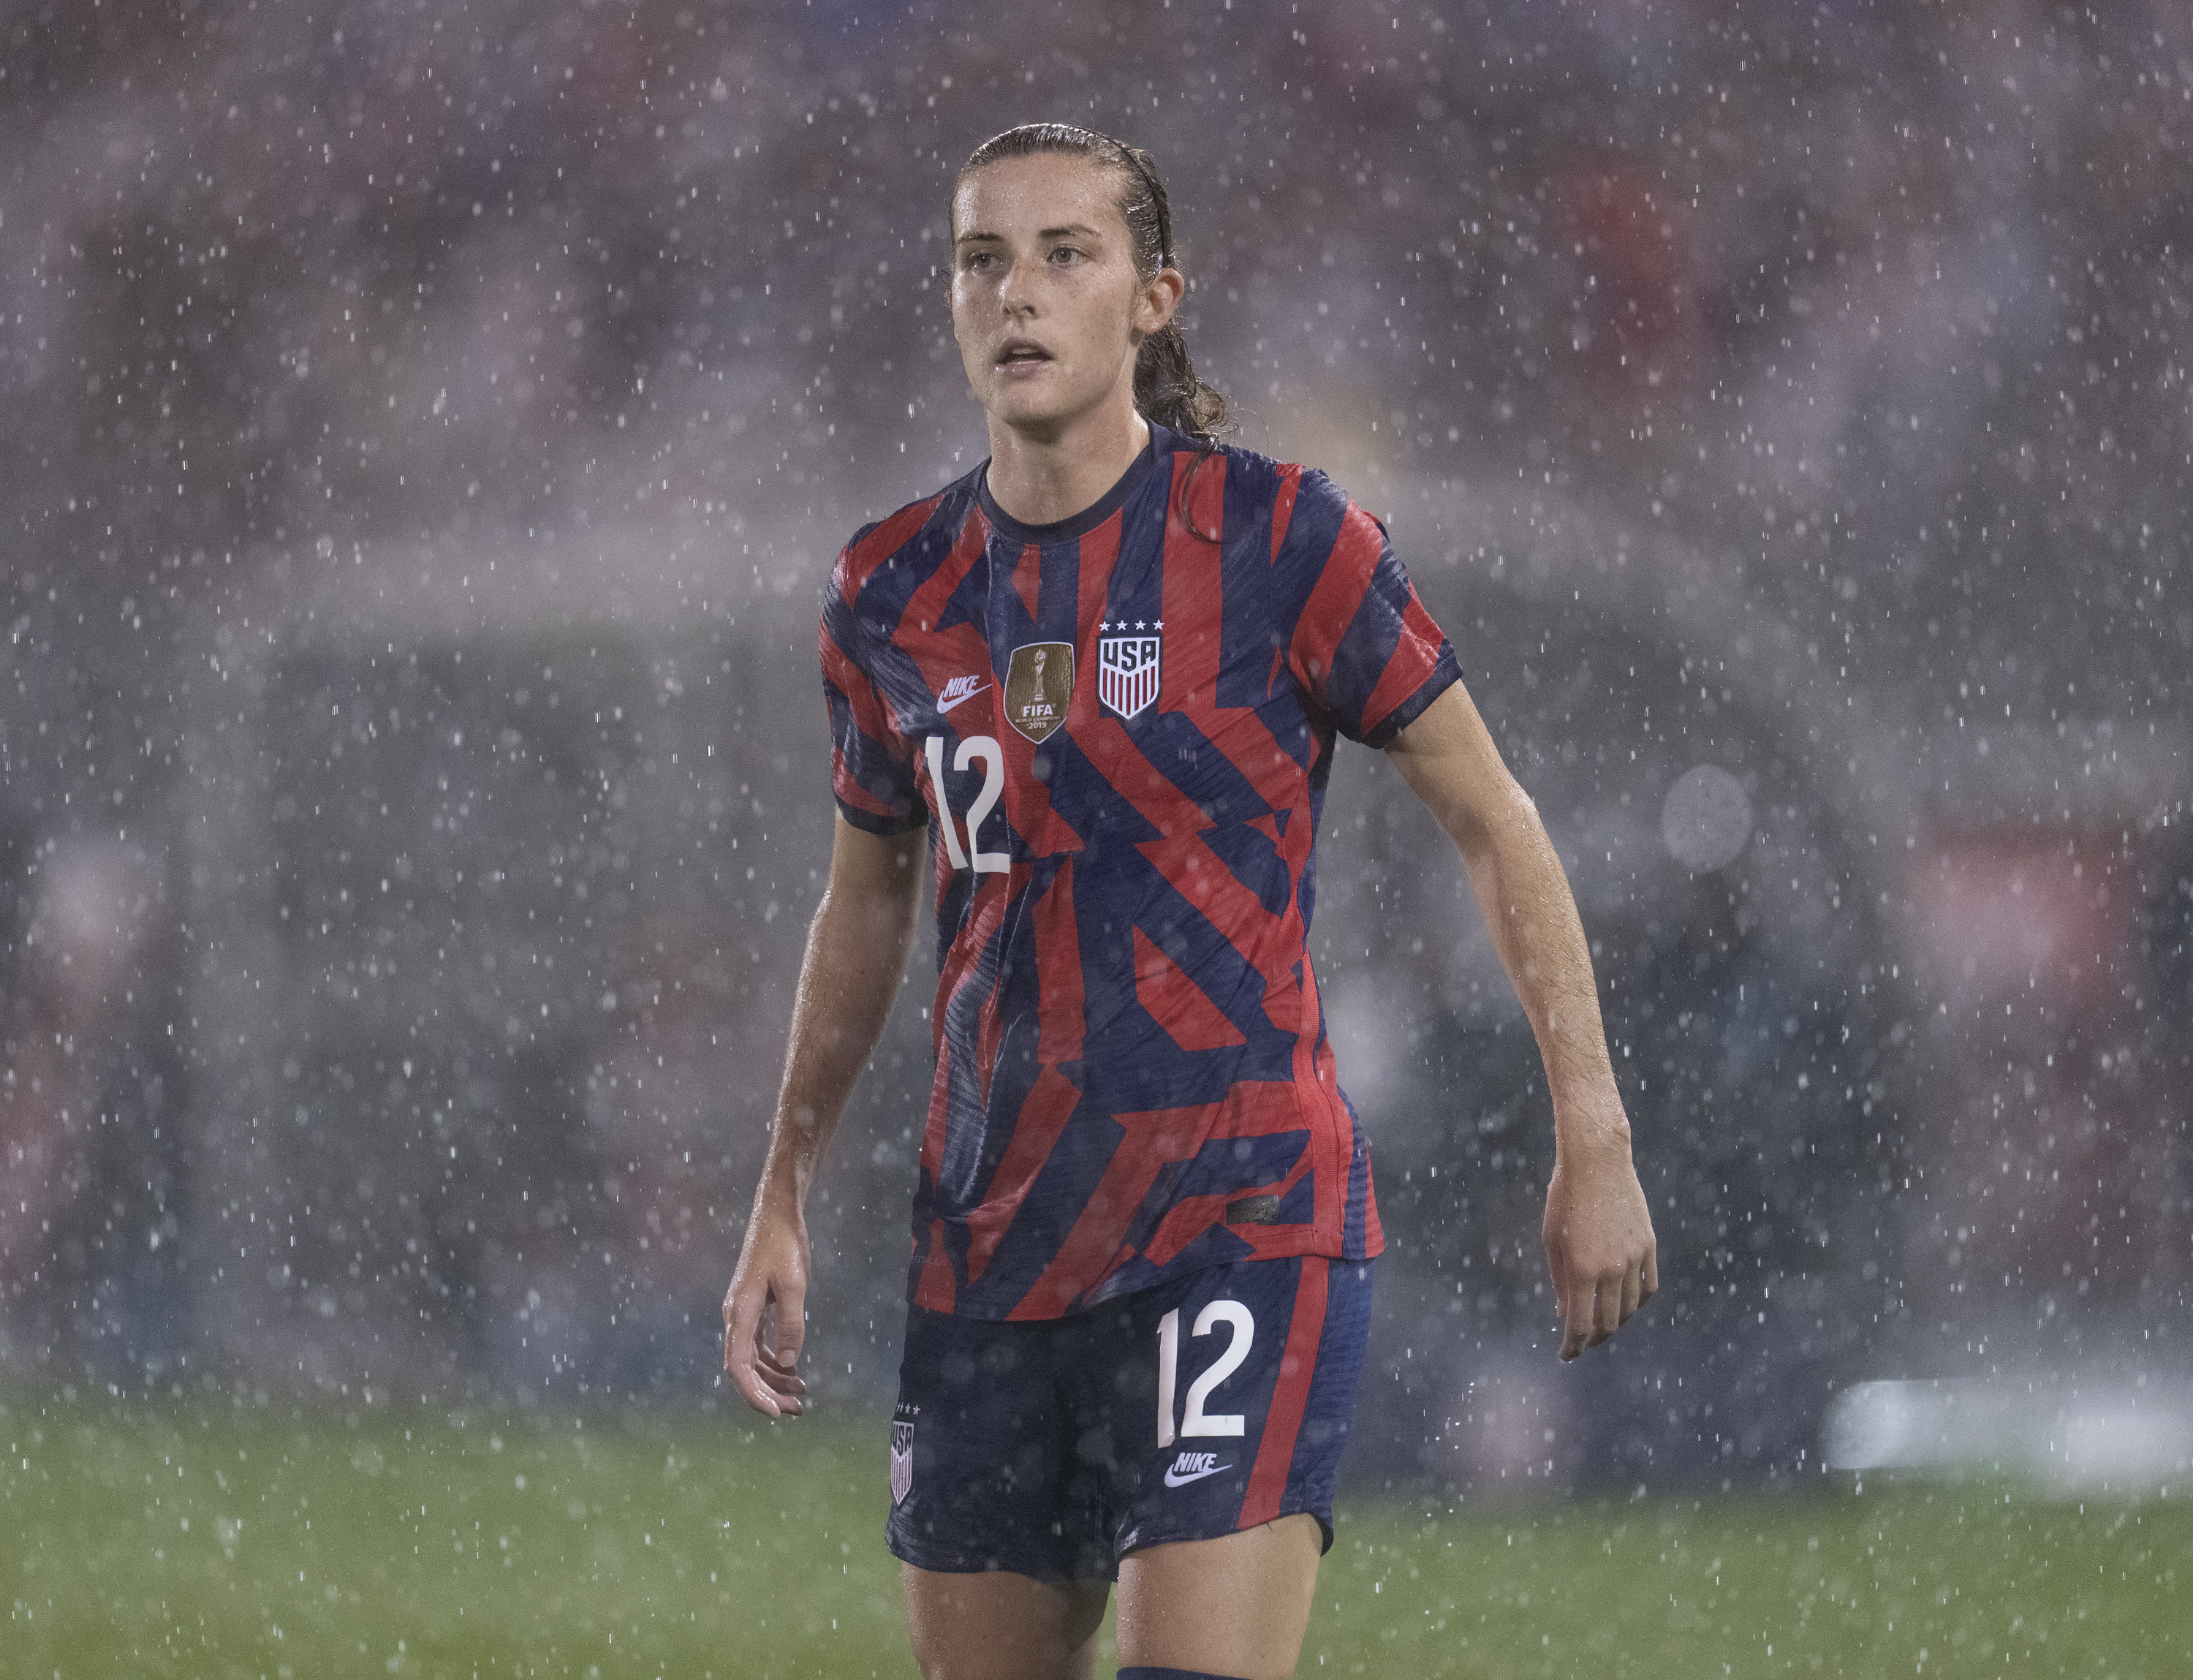 Tierna playing in the rain for Team USA